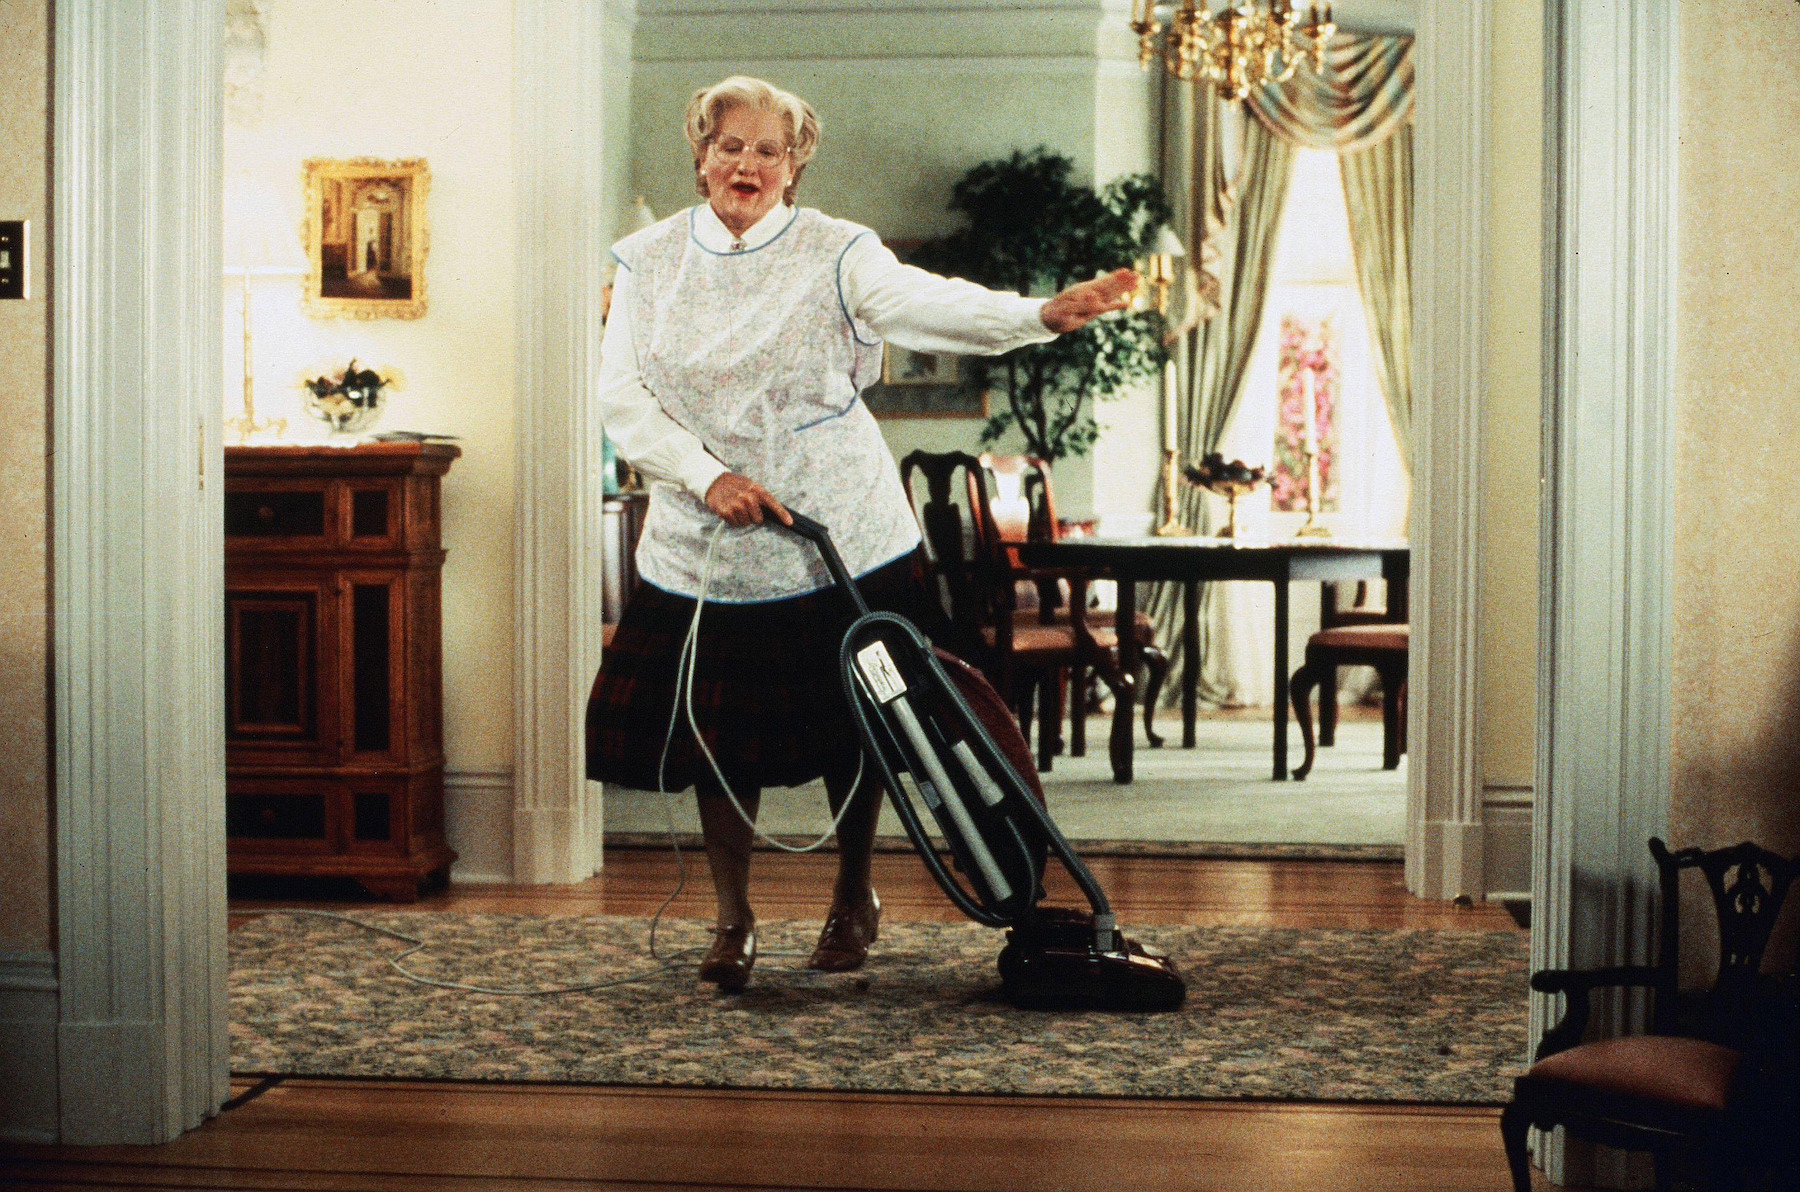 <p>Comical and heartwarming, <em>Mrs. Doubtfire</em> is a great way to share the comic genius of the <a href="https://www.cheatsheet.com/entertainment/where-is-the-cast-of-mrs-doubtfire-now.html/">late Robin Williams</a> with your kids. After getting divorced, Daniel Hillard is desperate to find a way to spend more time with his kids. Daniel soon comes up with a nanny persona, <a href="https://www.imdb.com/title/tt0107614/">Mrs. Doubtfire</a>, who brings joy and fun into the kids’ lives. </p>